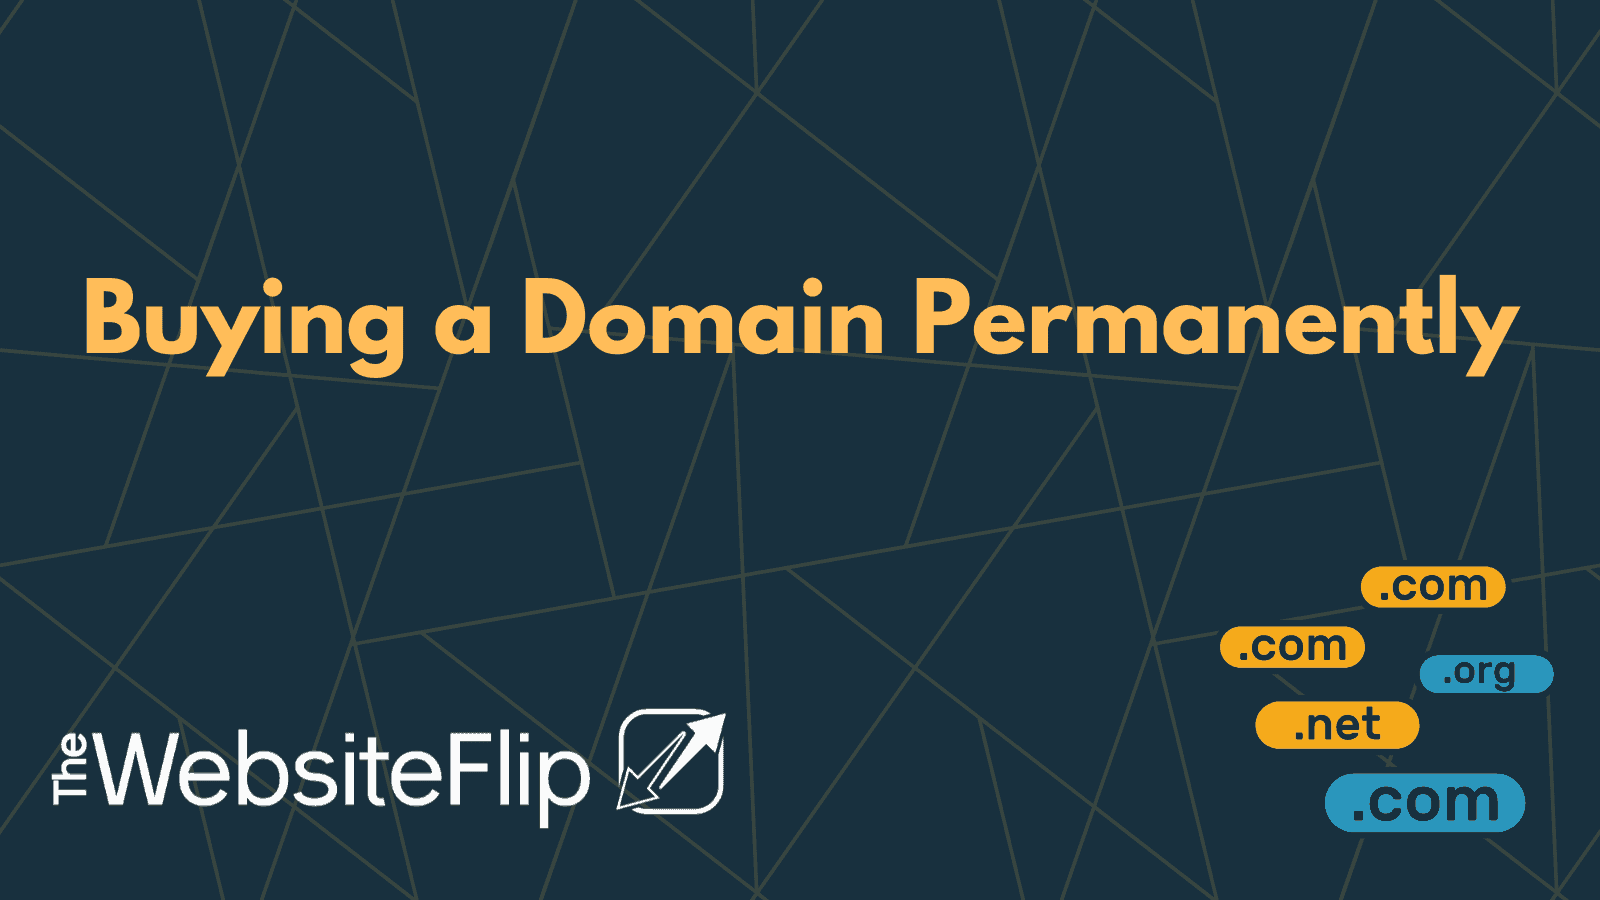 How Do I Permanently Buy A Domain Name